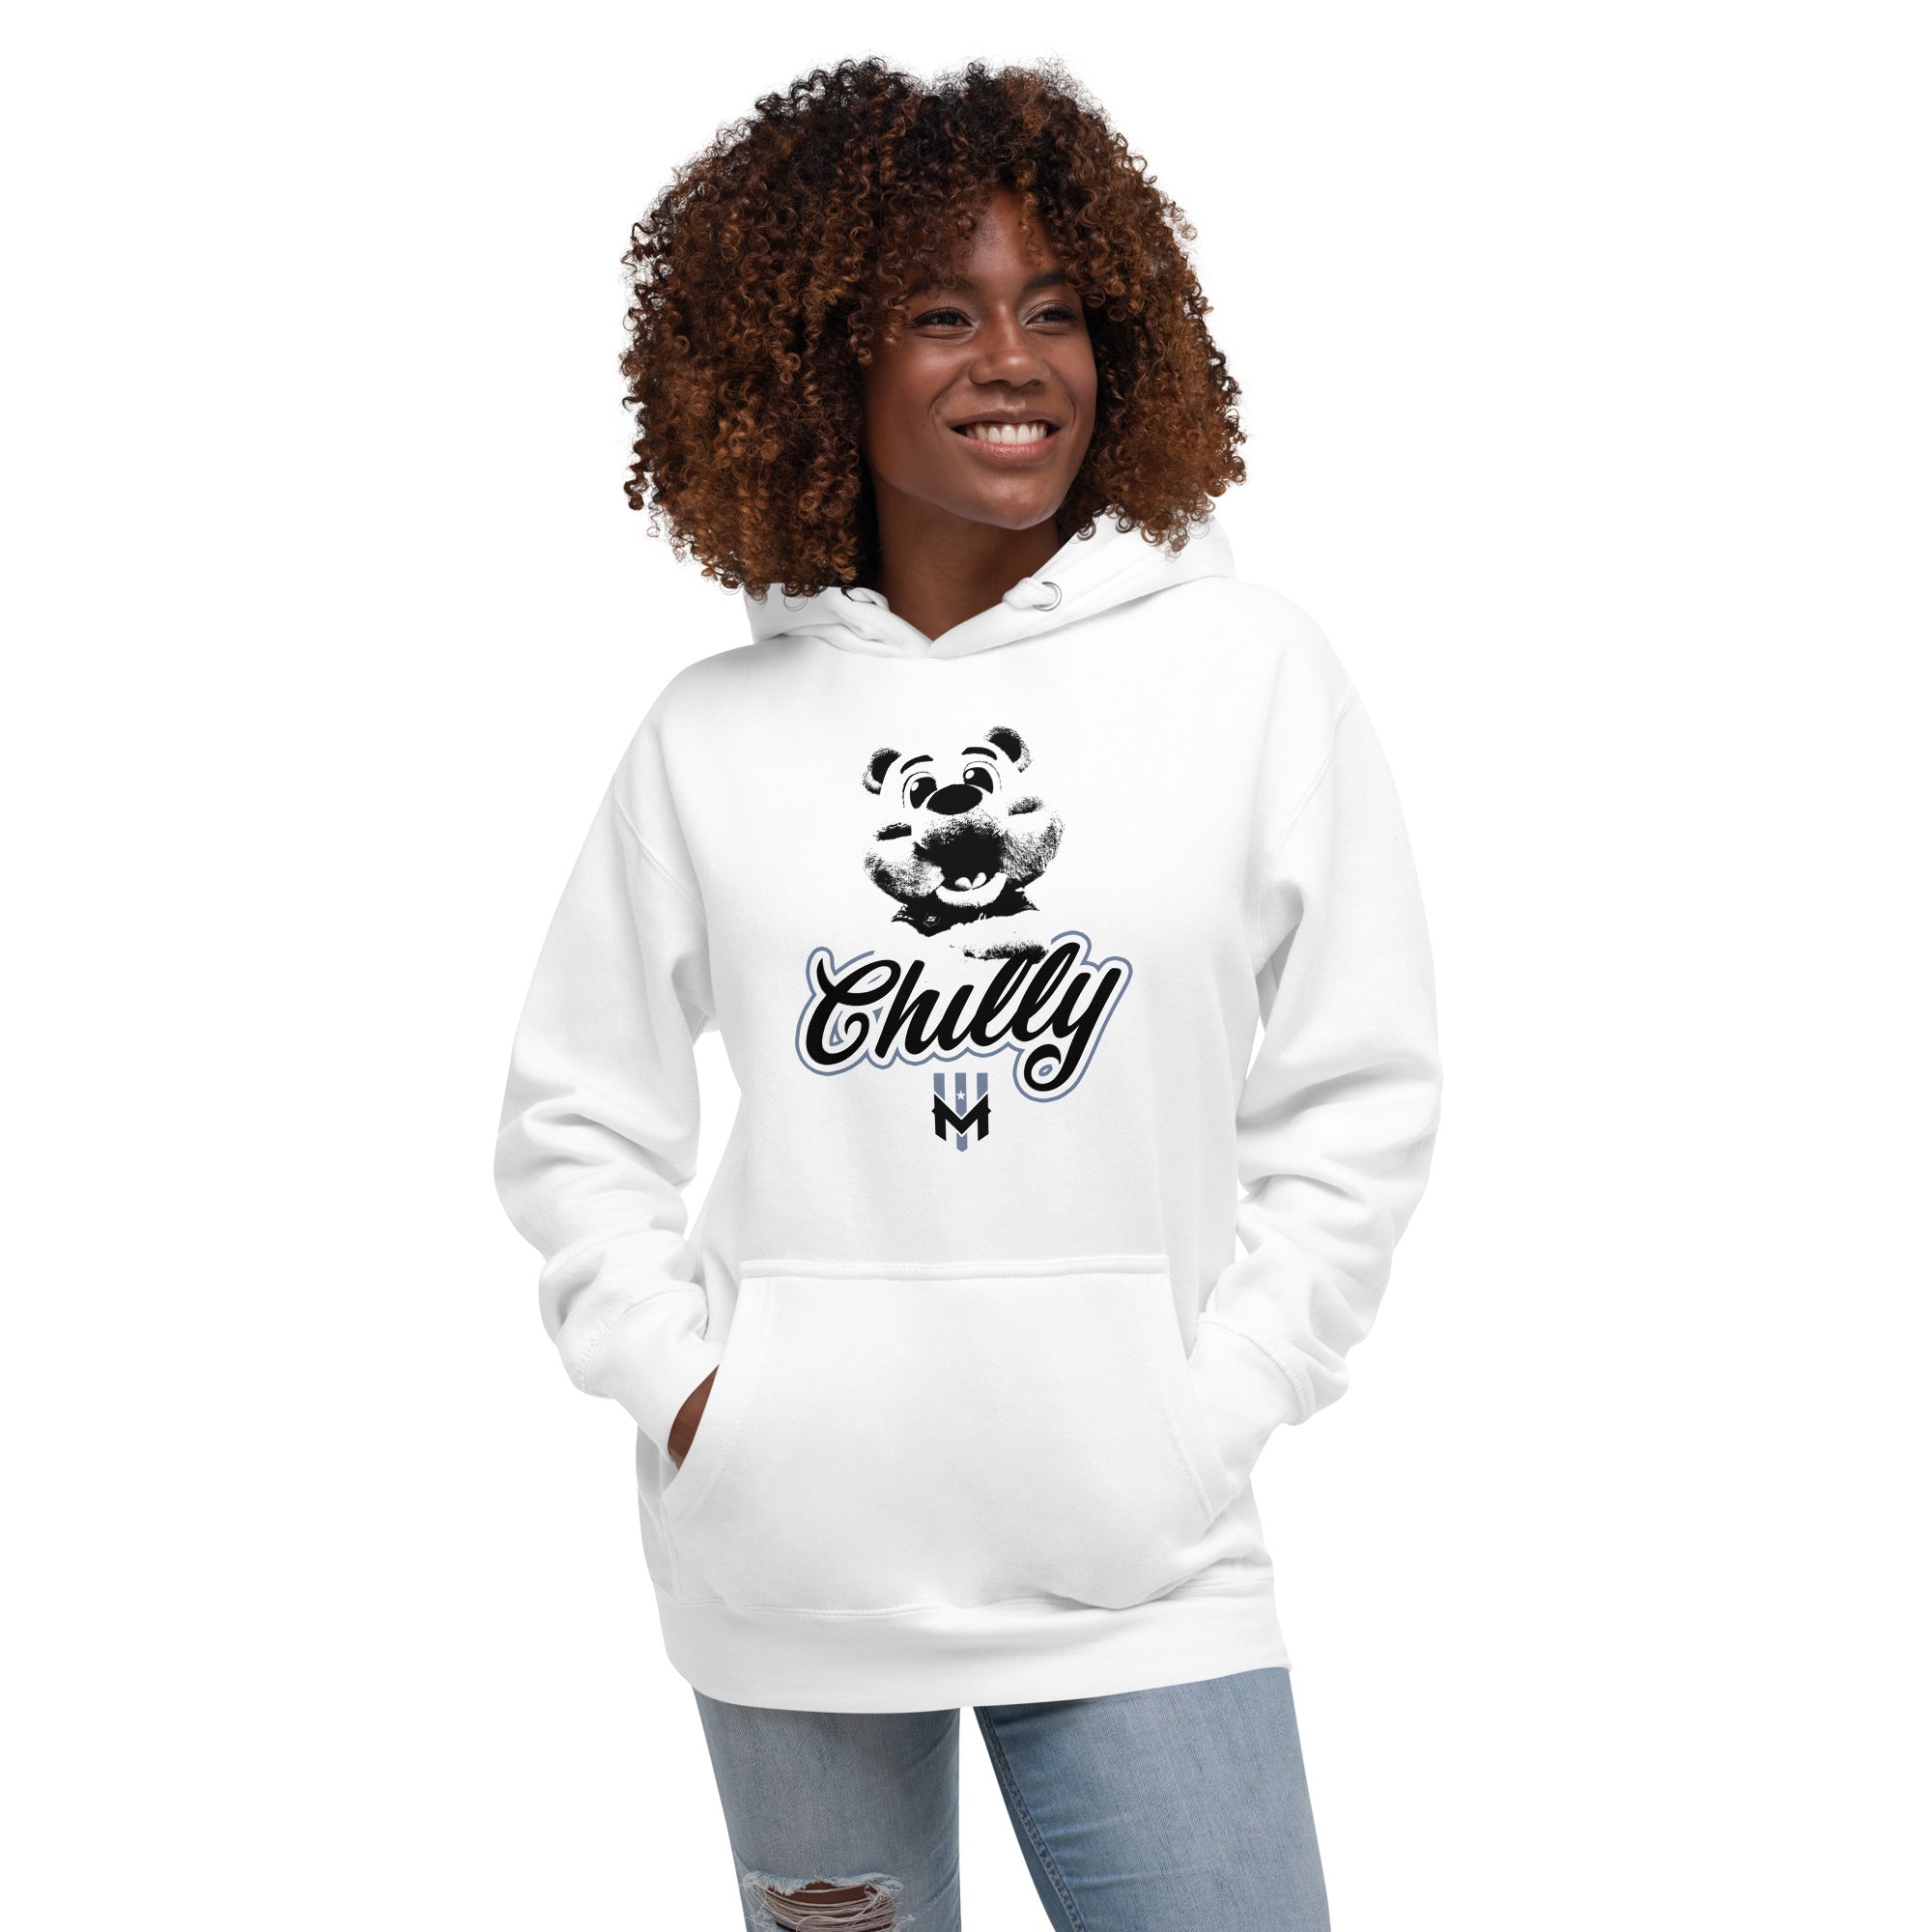 Wind Chill White "Chilly the Mascot" Hooded Sweatshirt